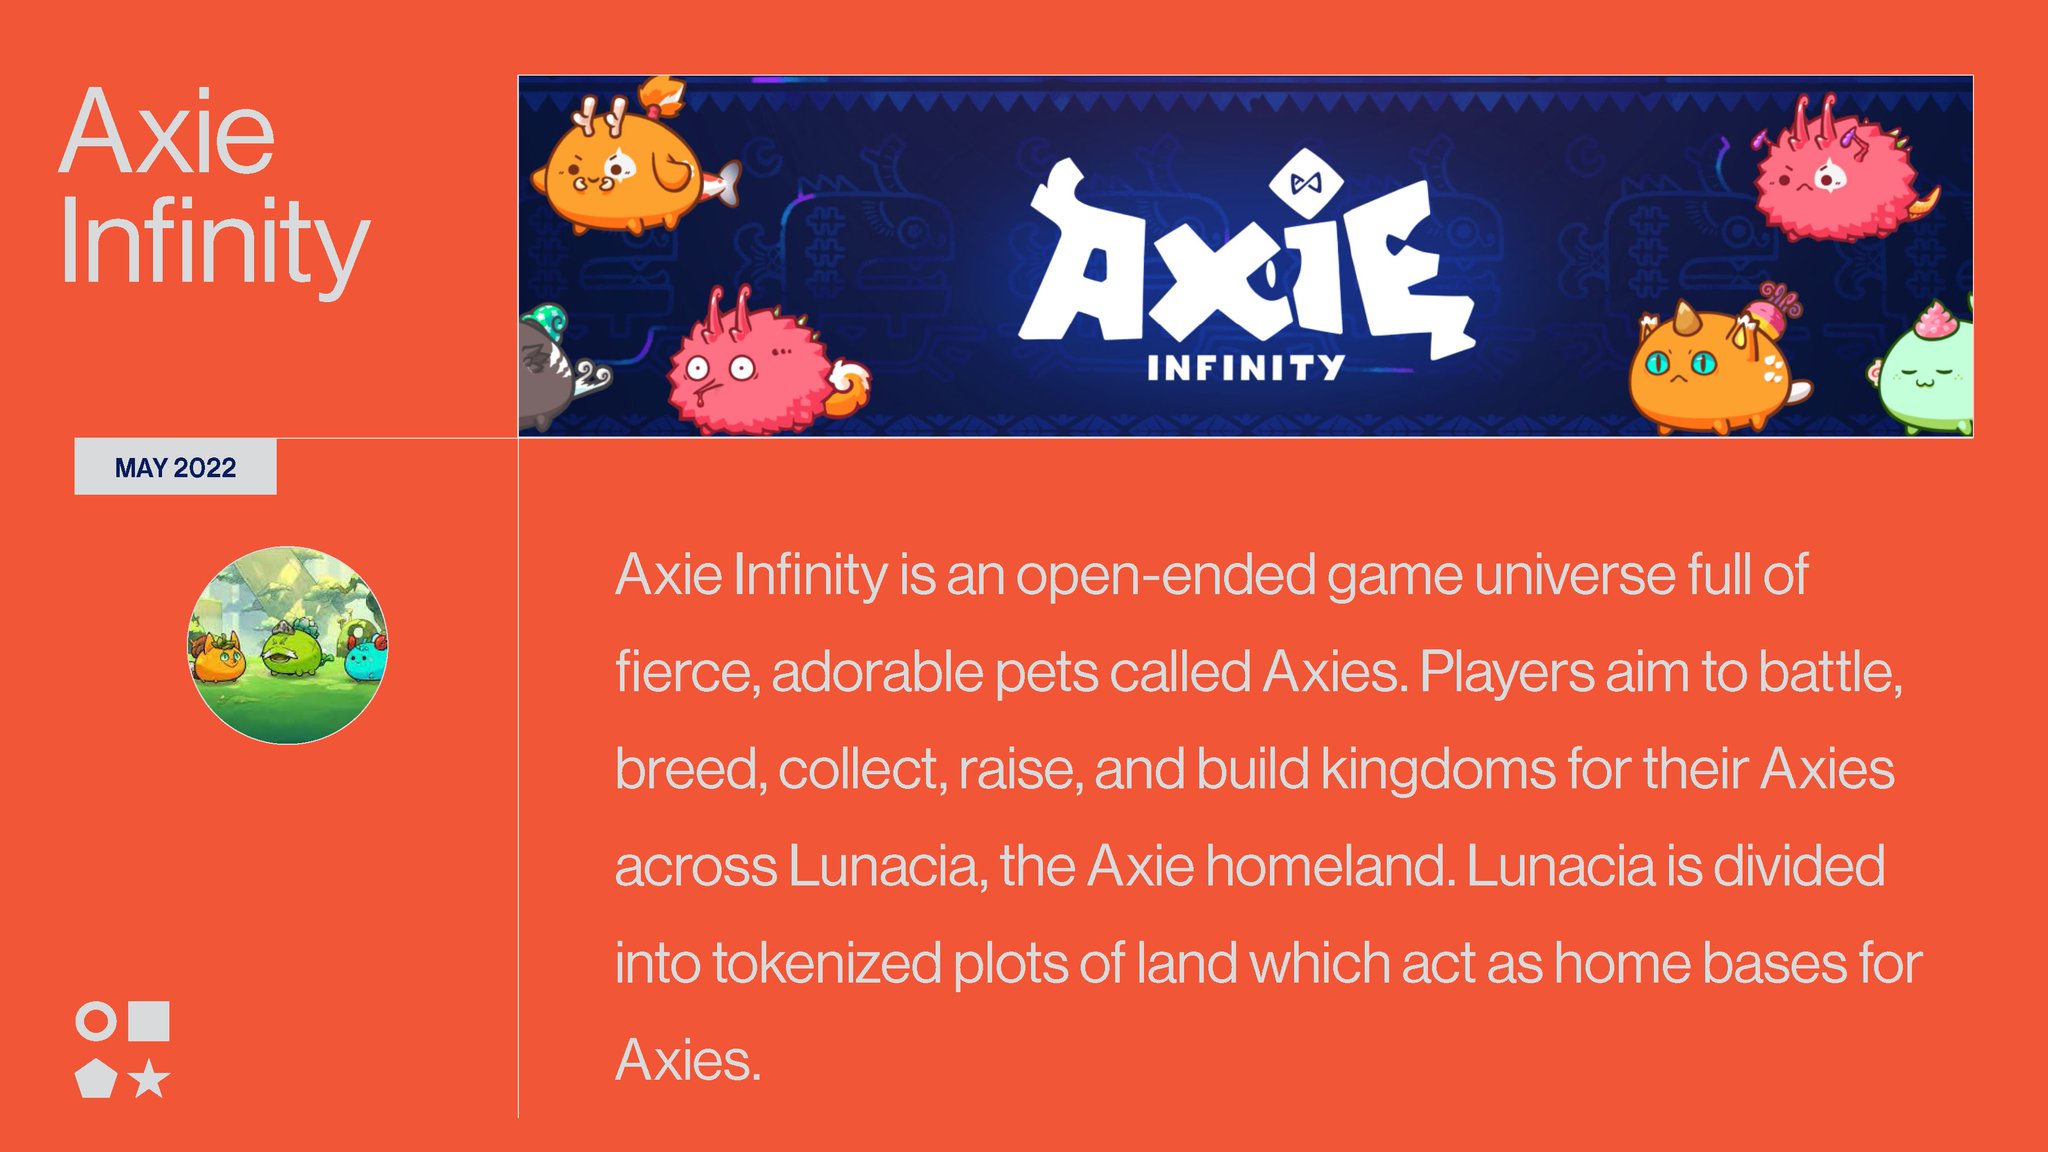 RT nonfungibles: We are now tracking @Ronin_Network for @AxieInfinity on our site!   Axie Infinity is an open-ended game universe full of fierce, adorable pets called Axies.   Learn more and track AXIE, ITEM, and LAND 👇 [nonfungible.com]  #NFT #Ronin #axie #ITEM #LAND #data [twitter.com] [pbs.twimg.com]